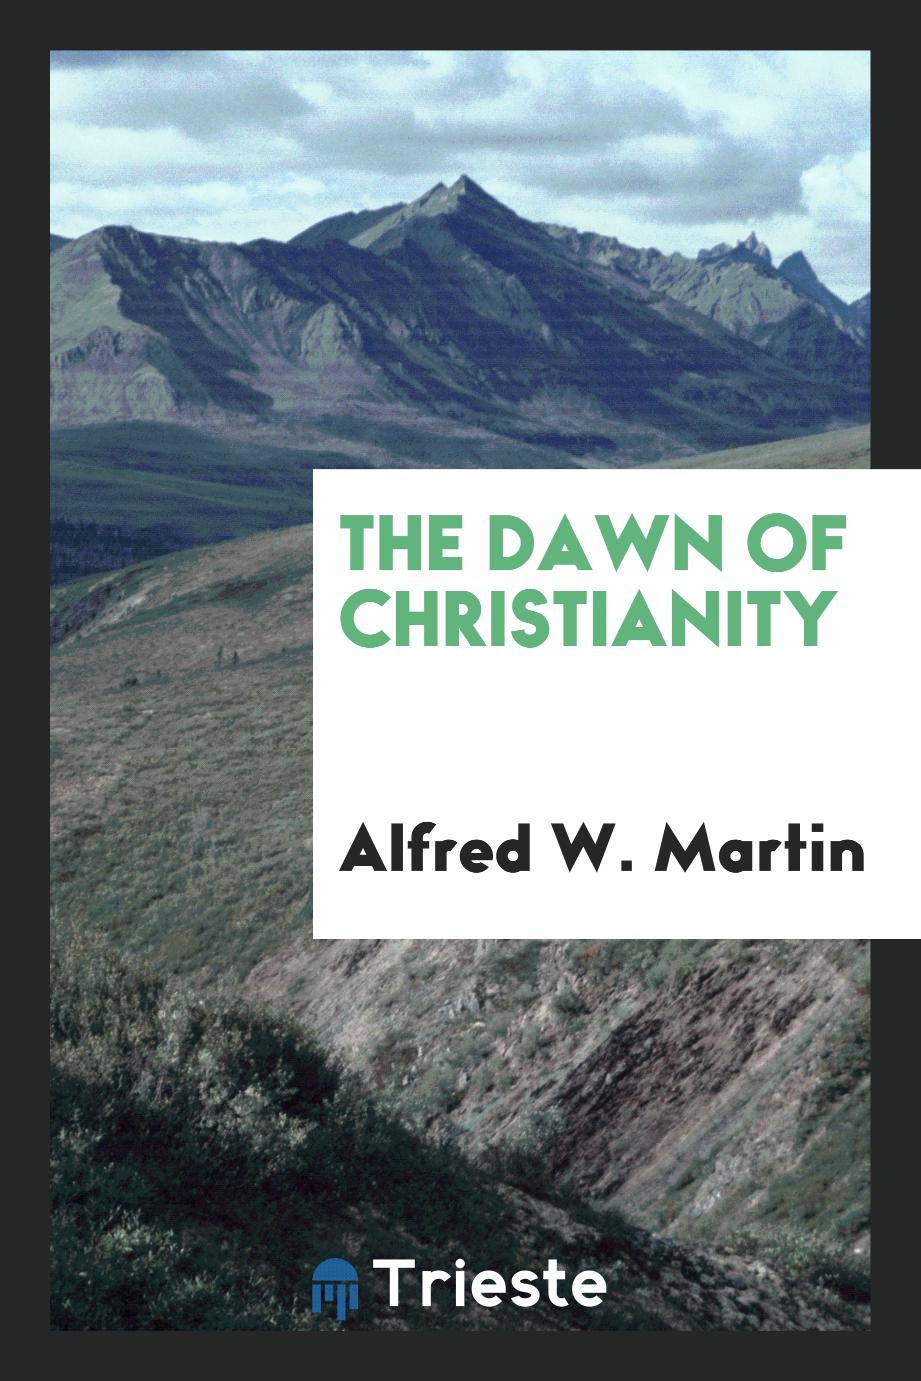 The dawn of Christianity